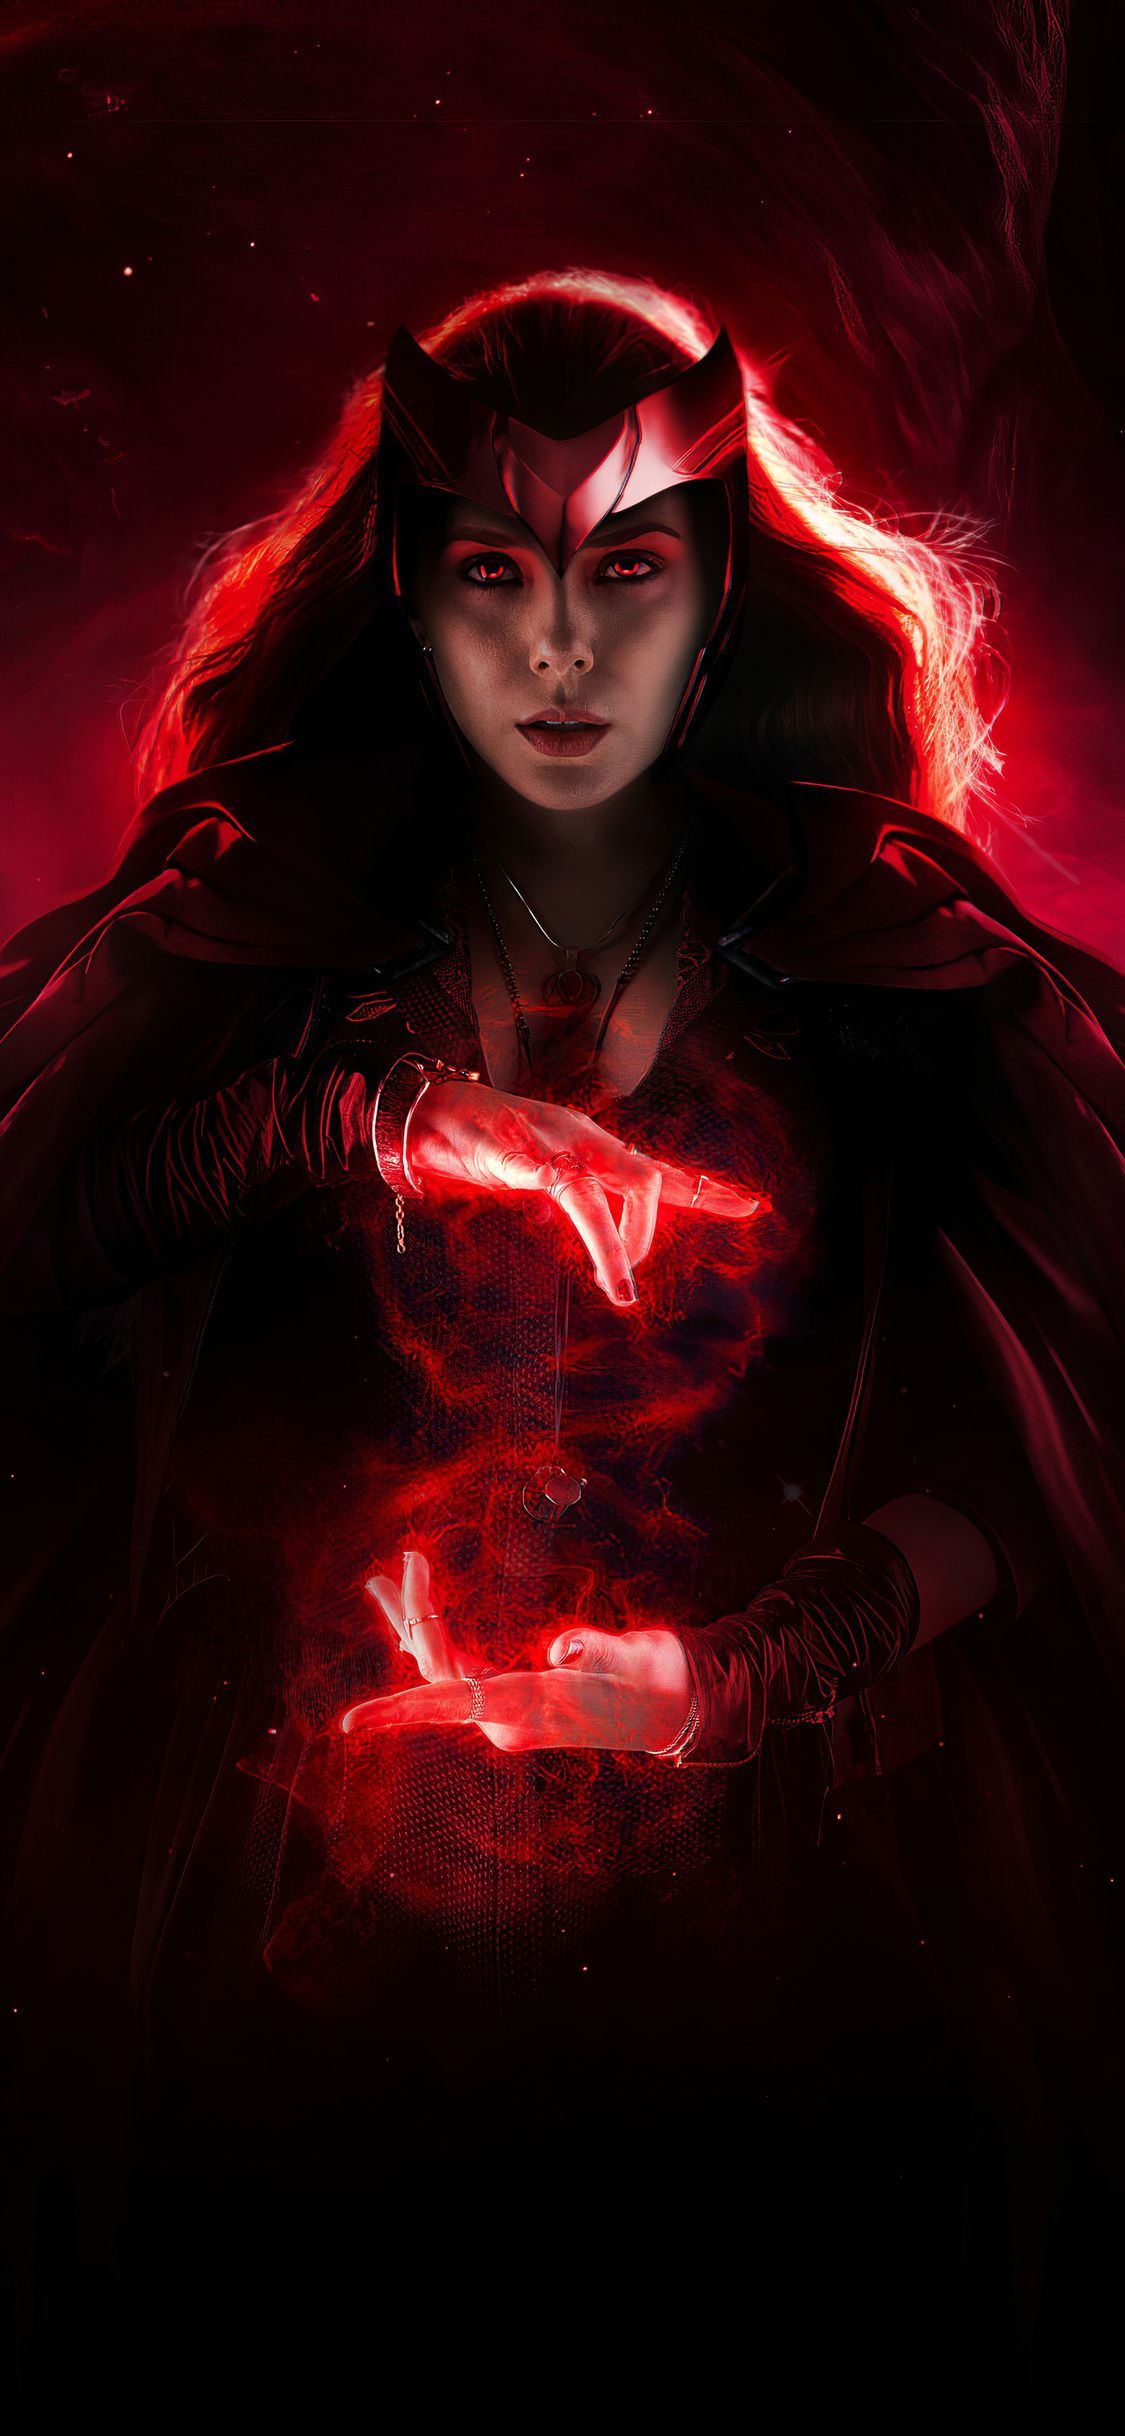 Scarlet Witch 2020 4k iPhone XS, iPhone iPhone X HD 4k Wallpaper, Image, Backgrou. Scarlet witch marvel, Scarlet witch avengers, Scarlet witch comic